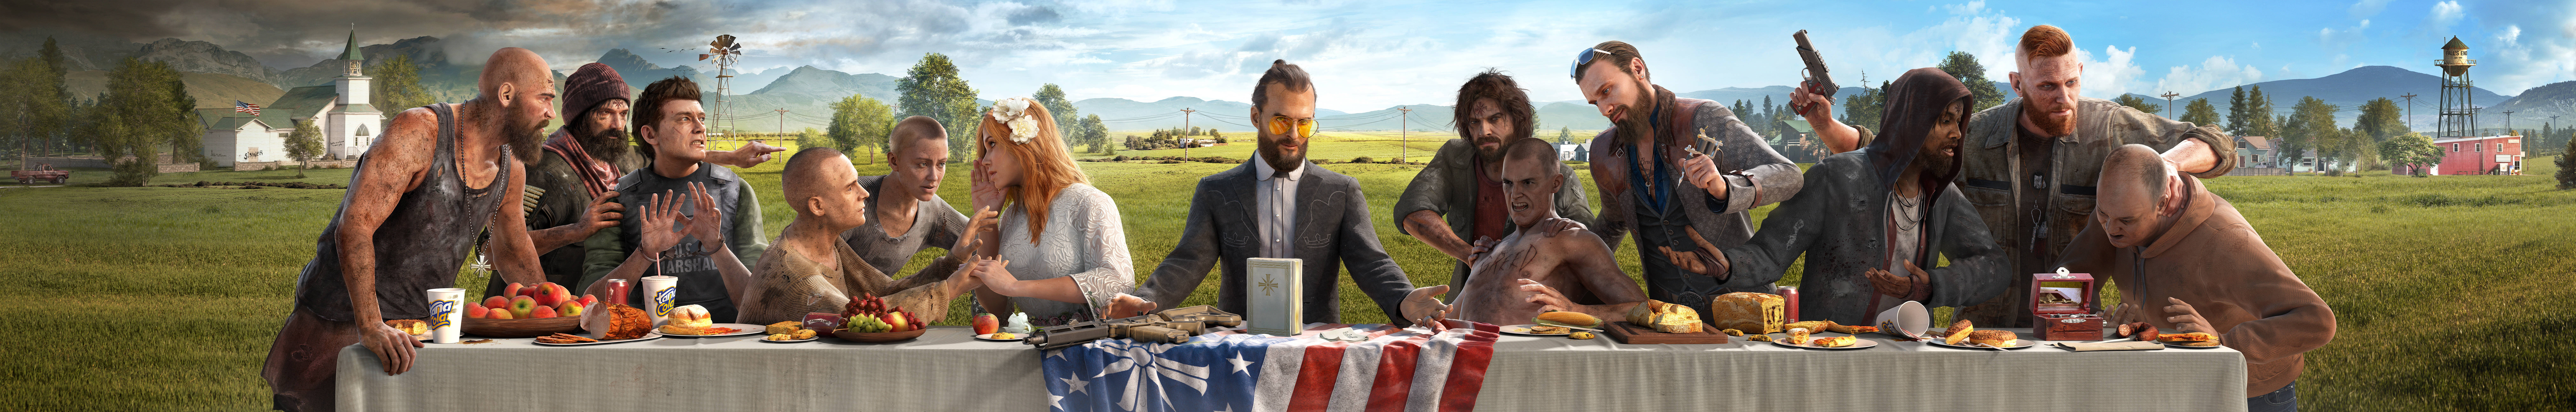 Far Cry 5 Cult Members Background